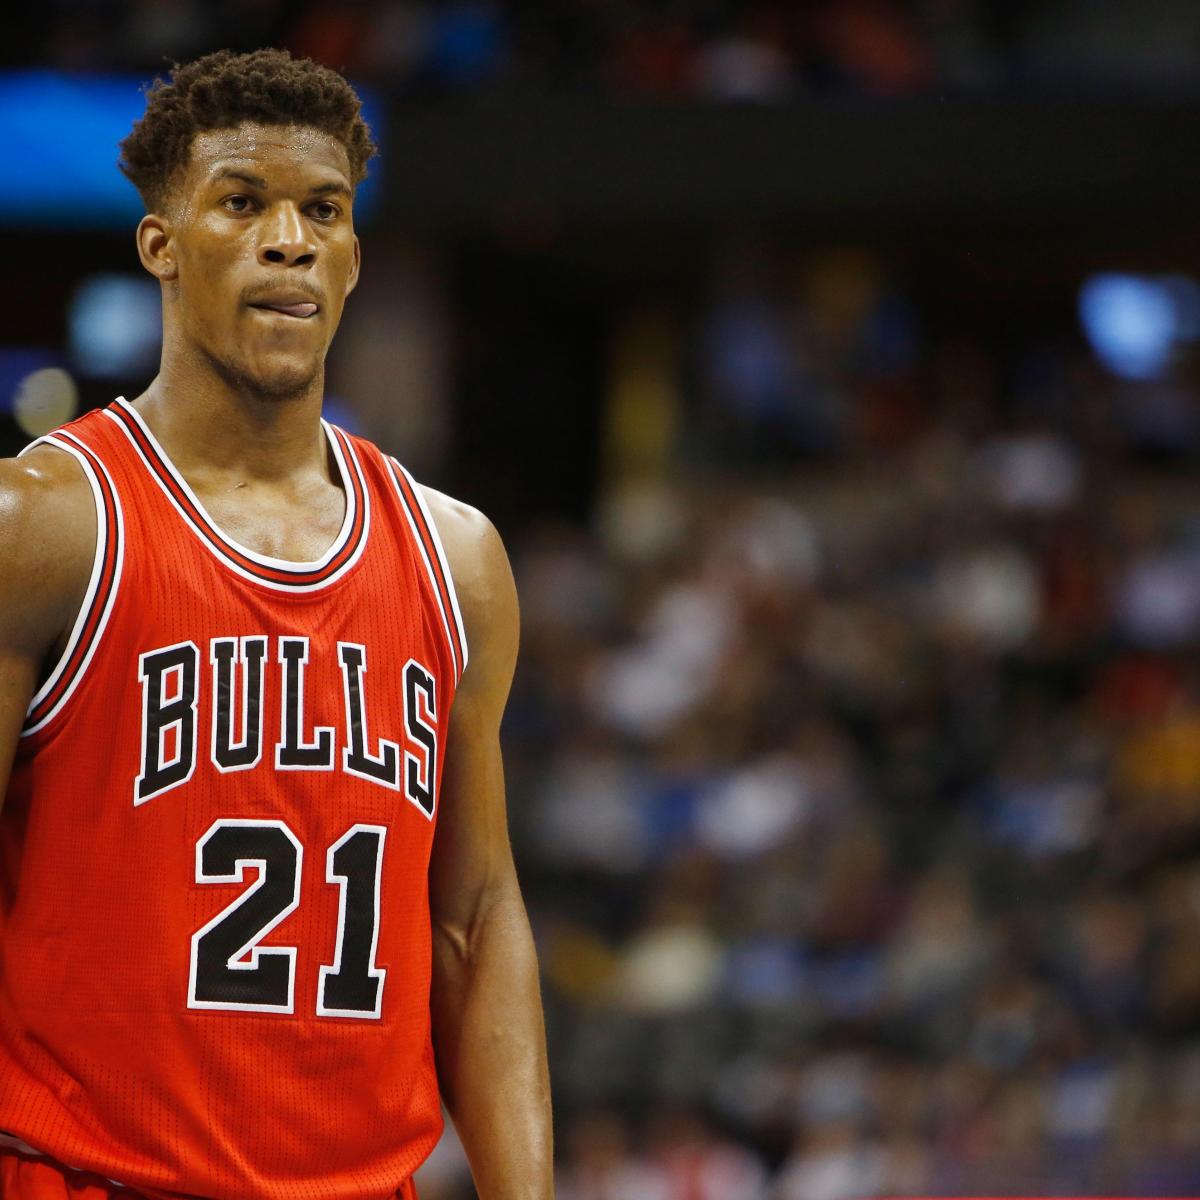 Jimmy Butler's Best Career Highlights: See The NBA Star's Top Plays